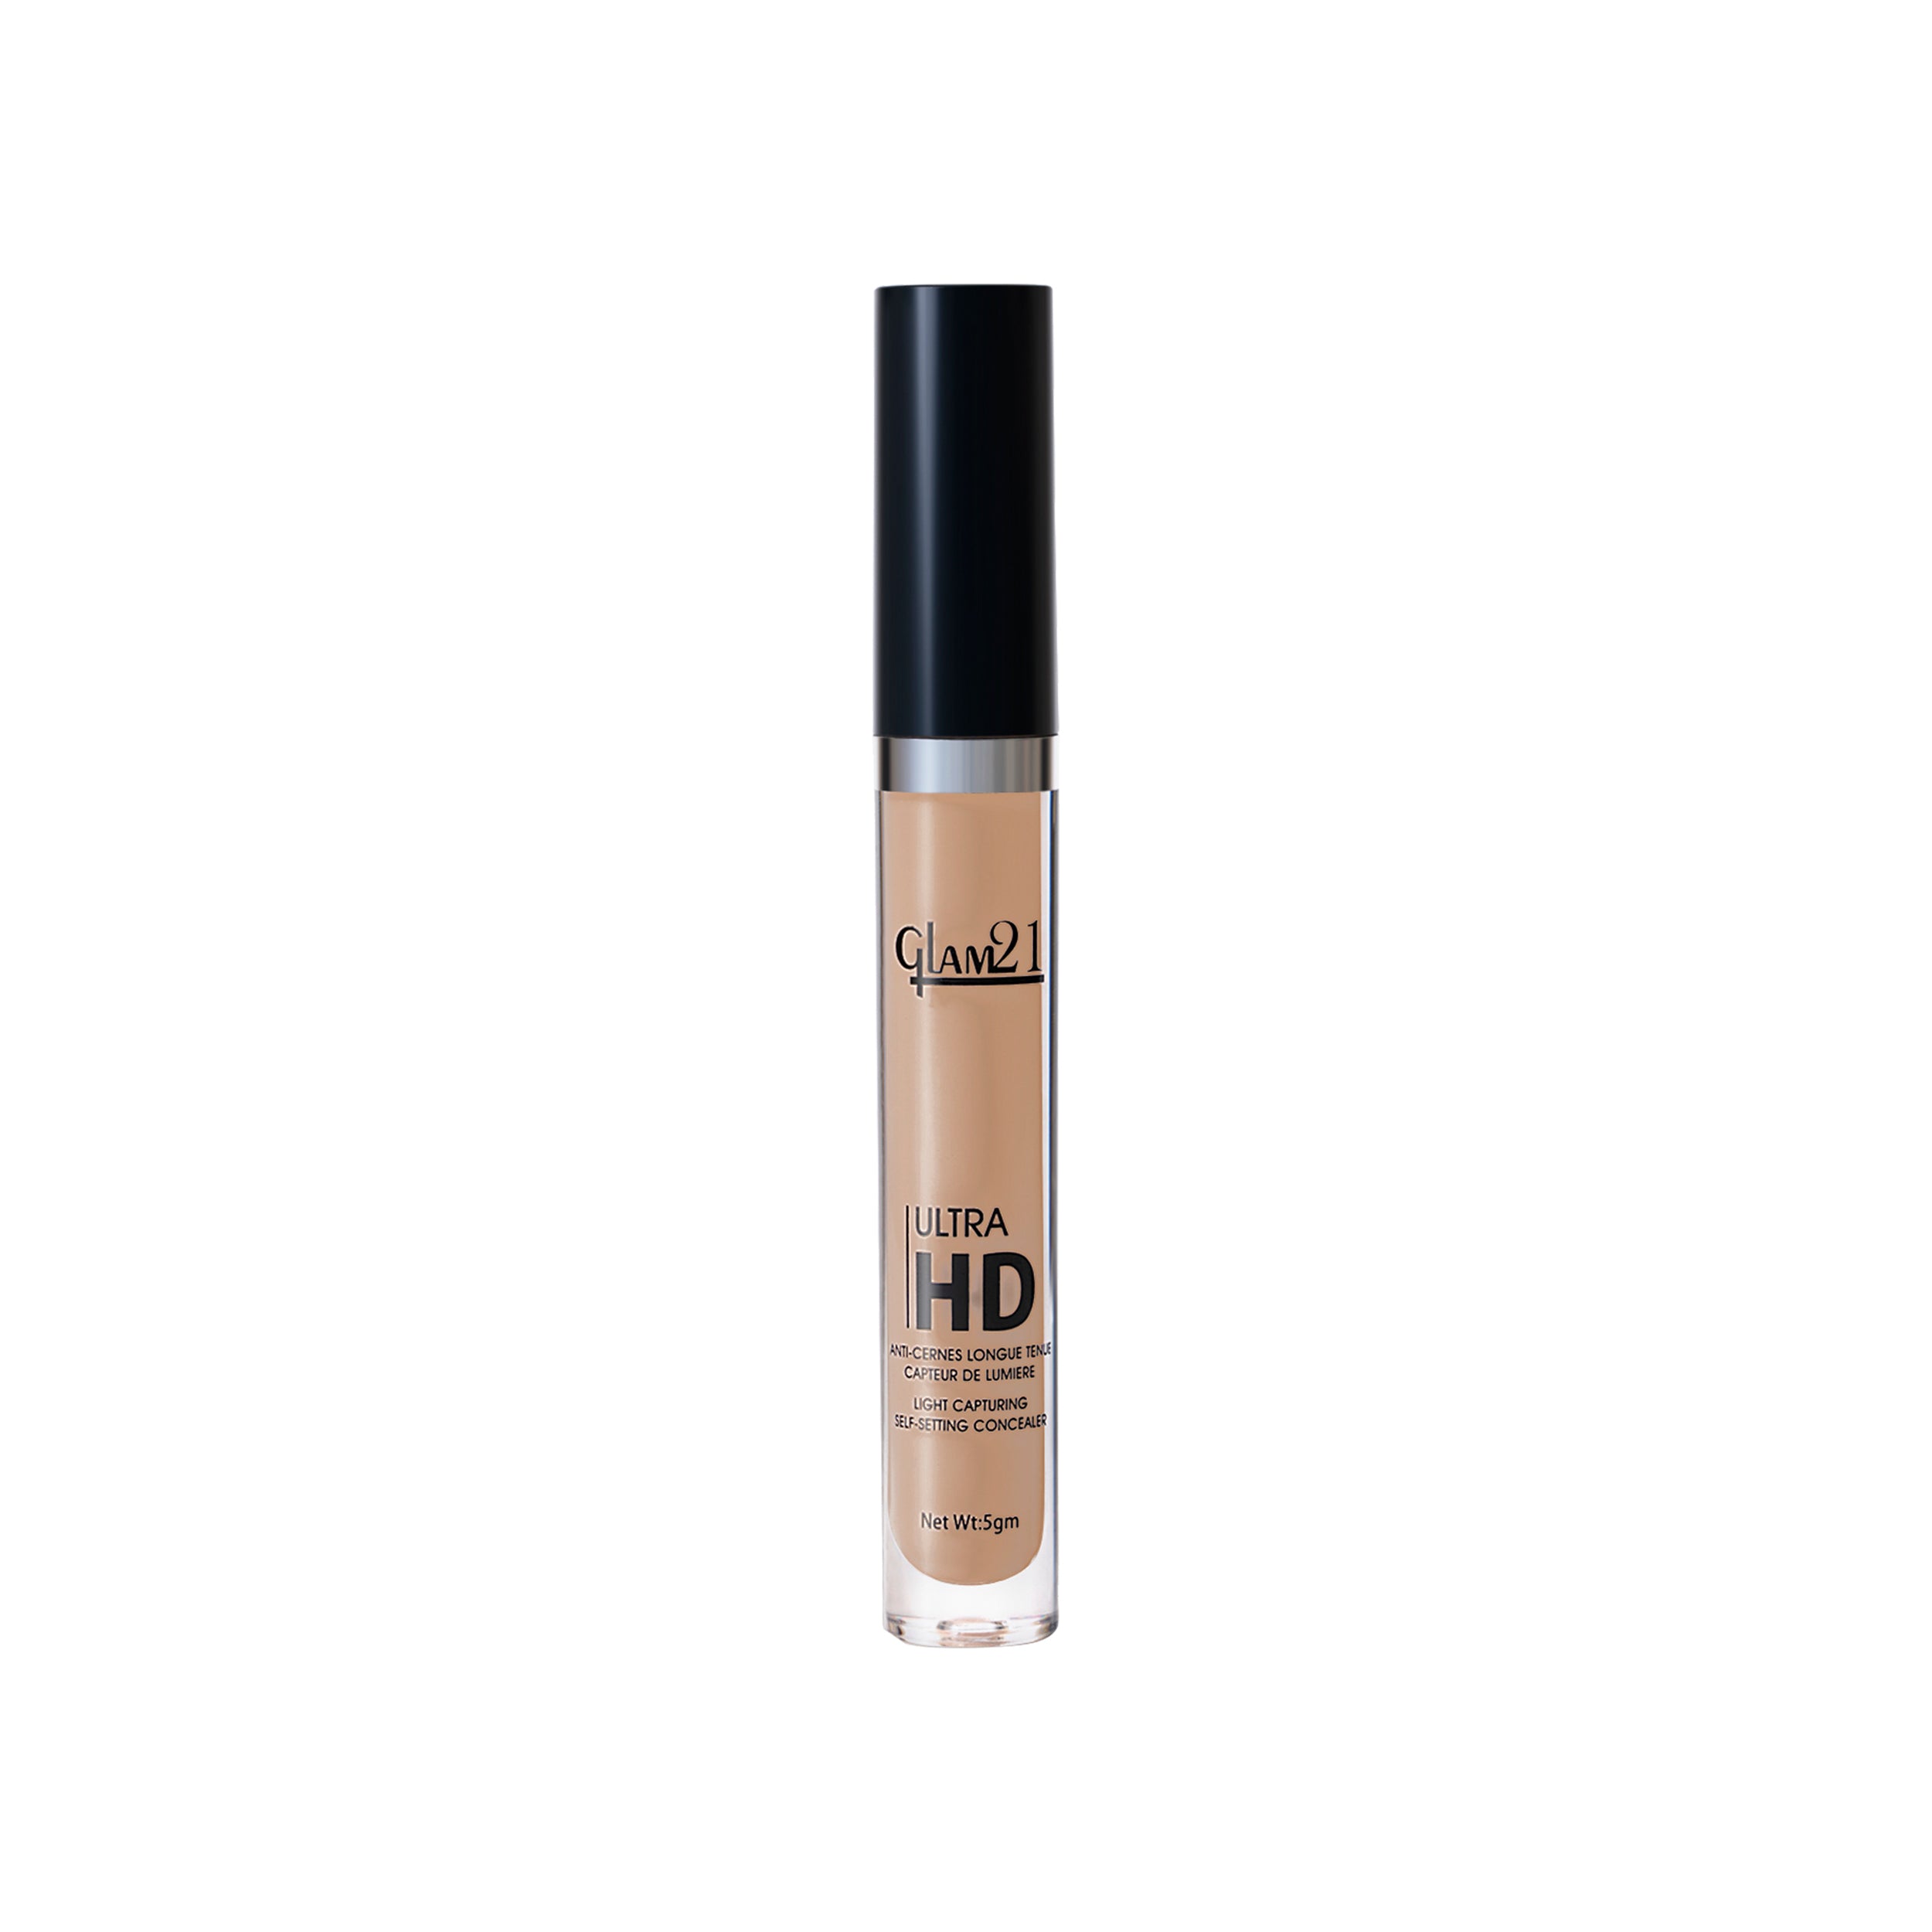 Glam21 Ultra HD Liquid Concealer for HD Finish | Non-sticky & Long Lasting Matte Finish Concealer (Sand, 5 g)